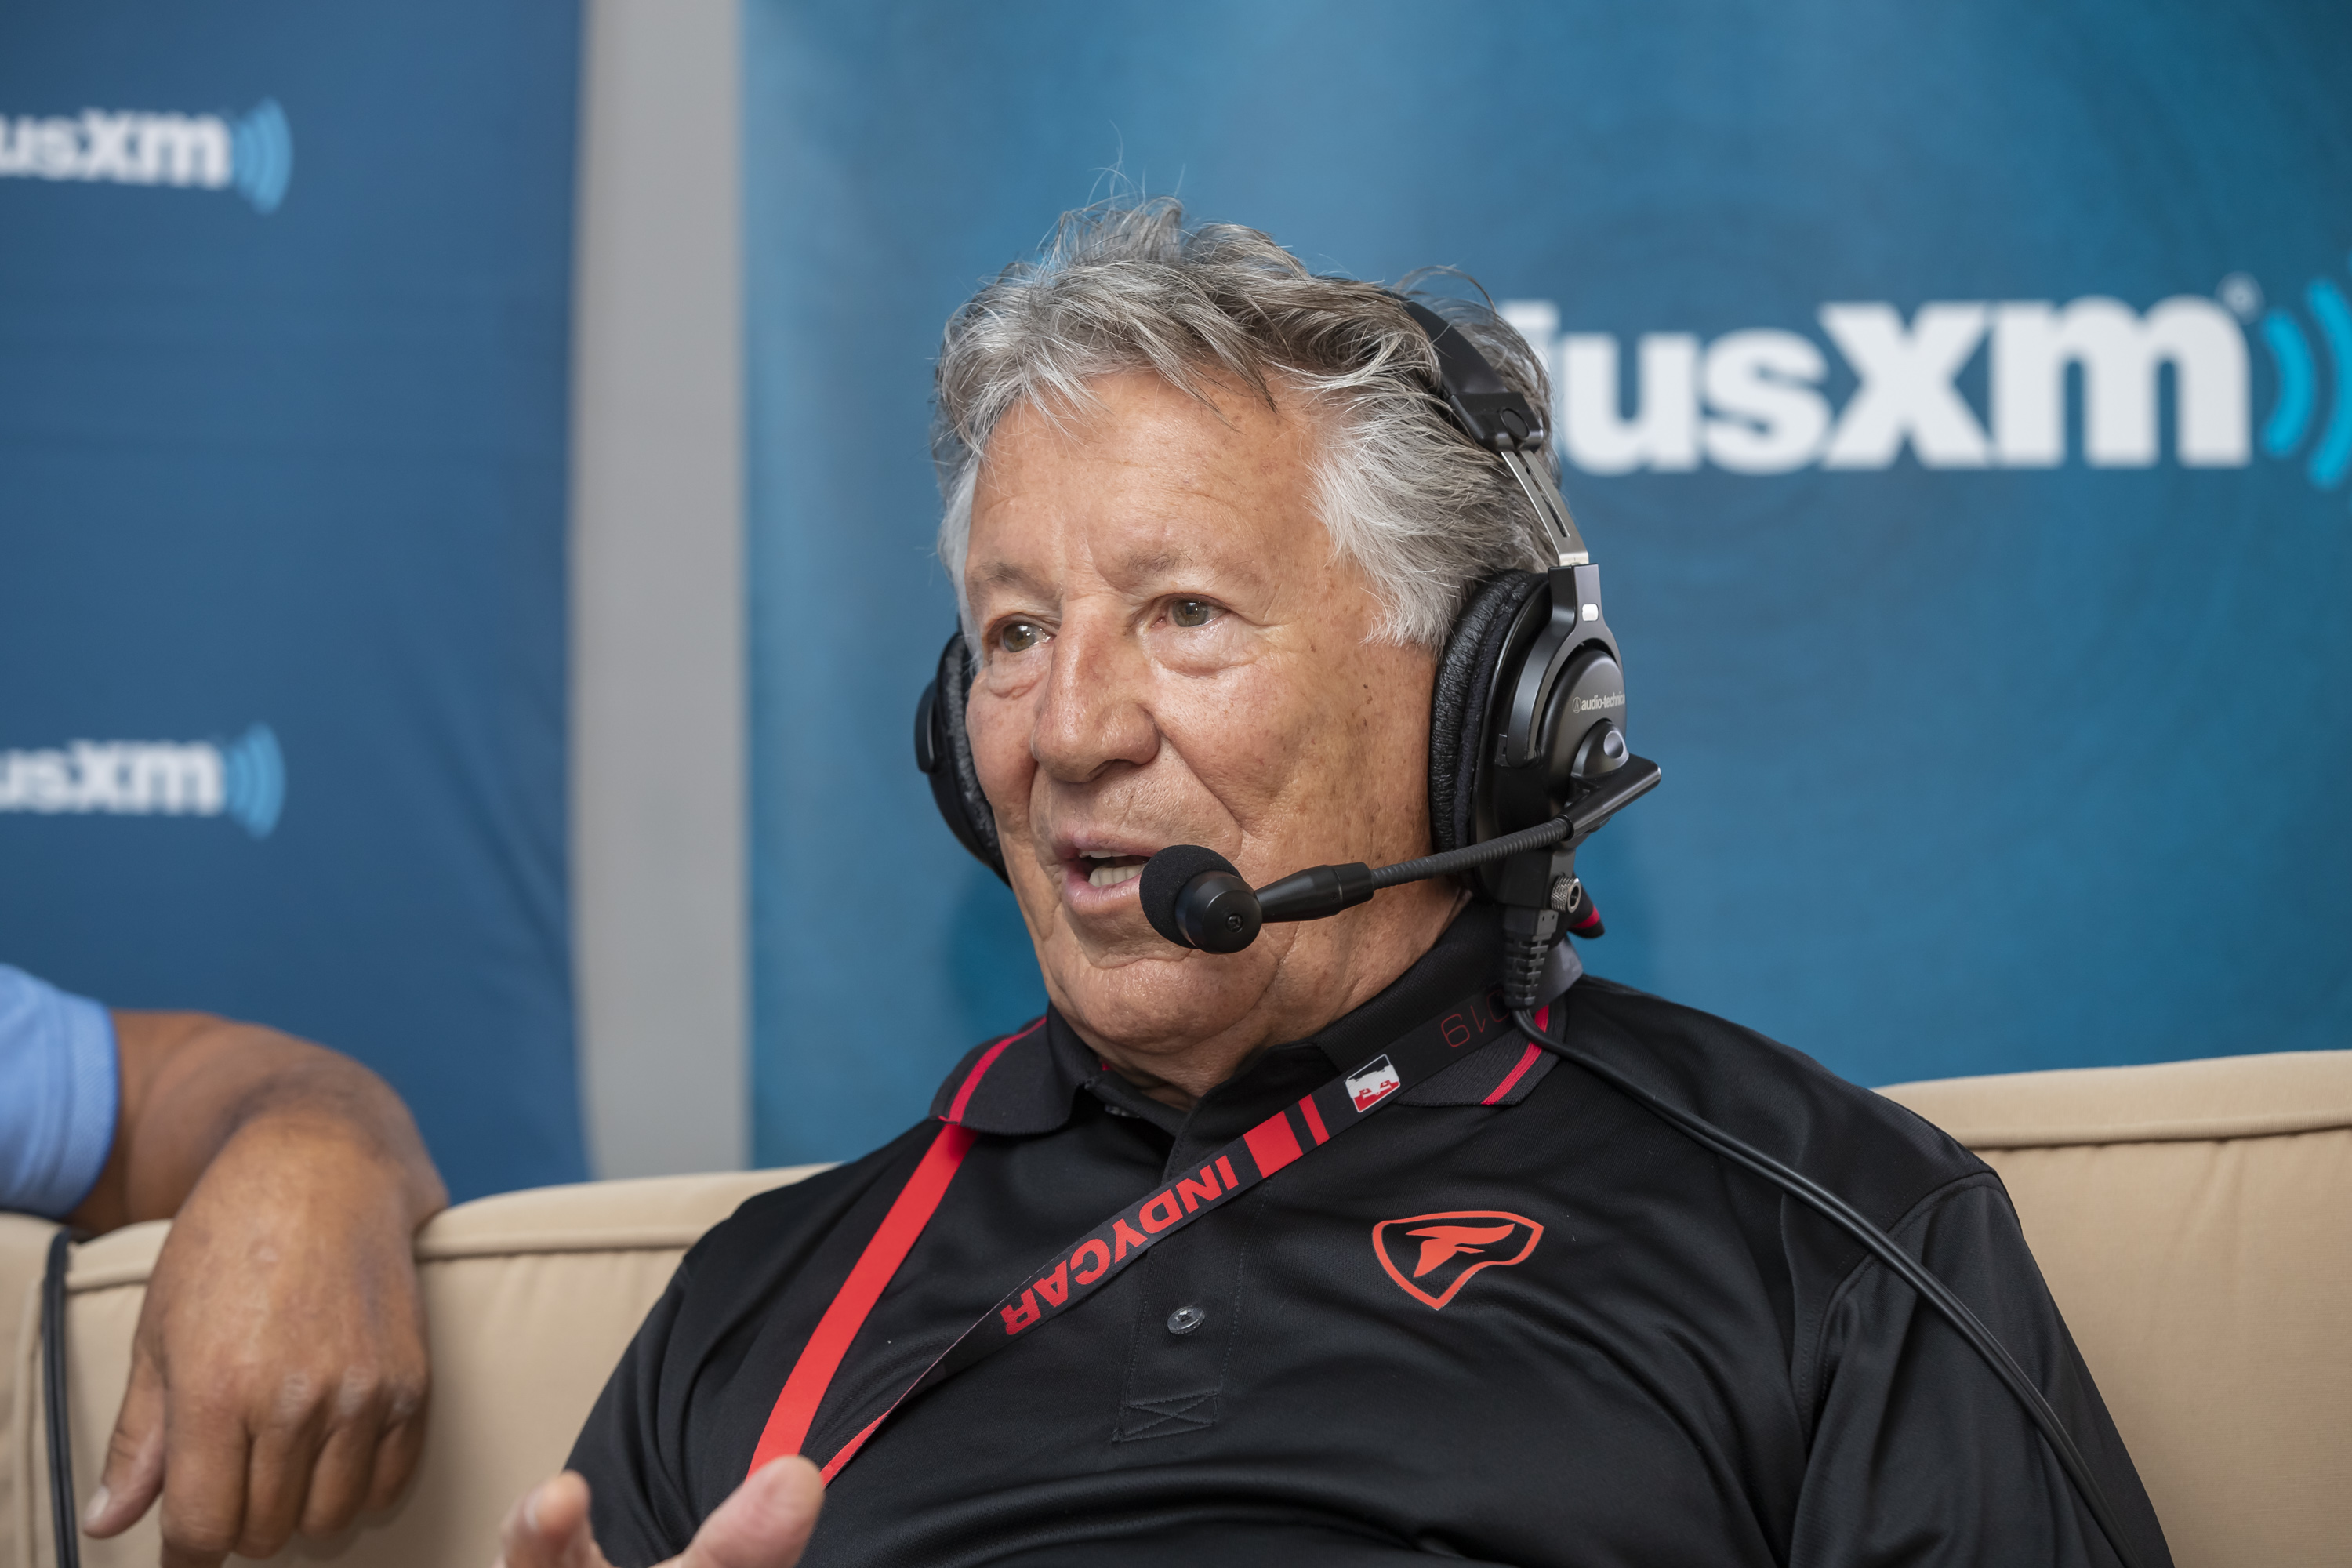 Mario Andretti and Tom Brady: 1 GOAT Rooting for Another